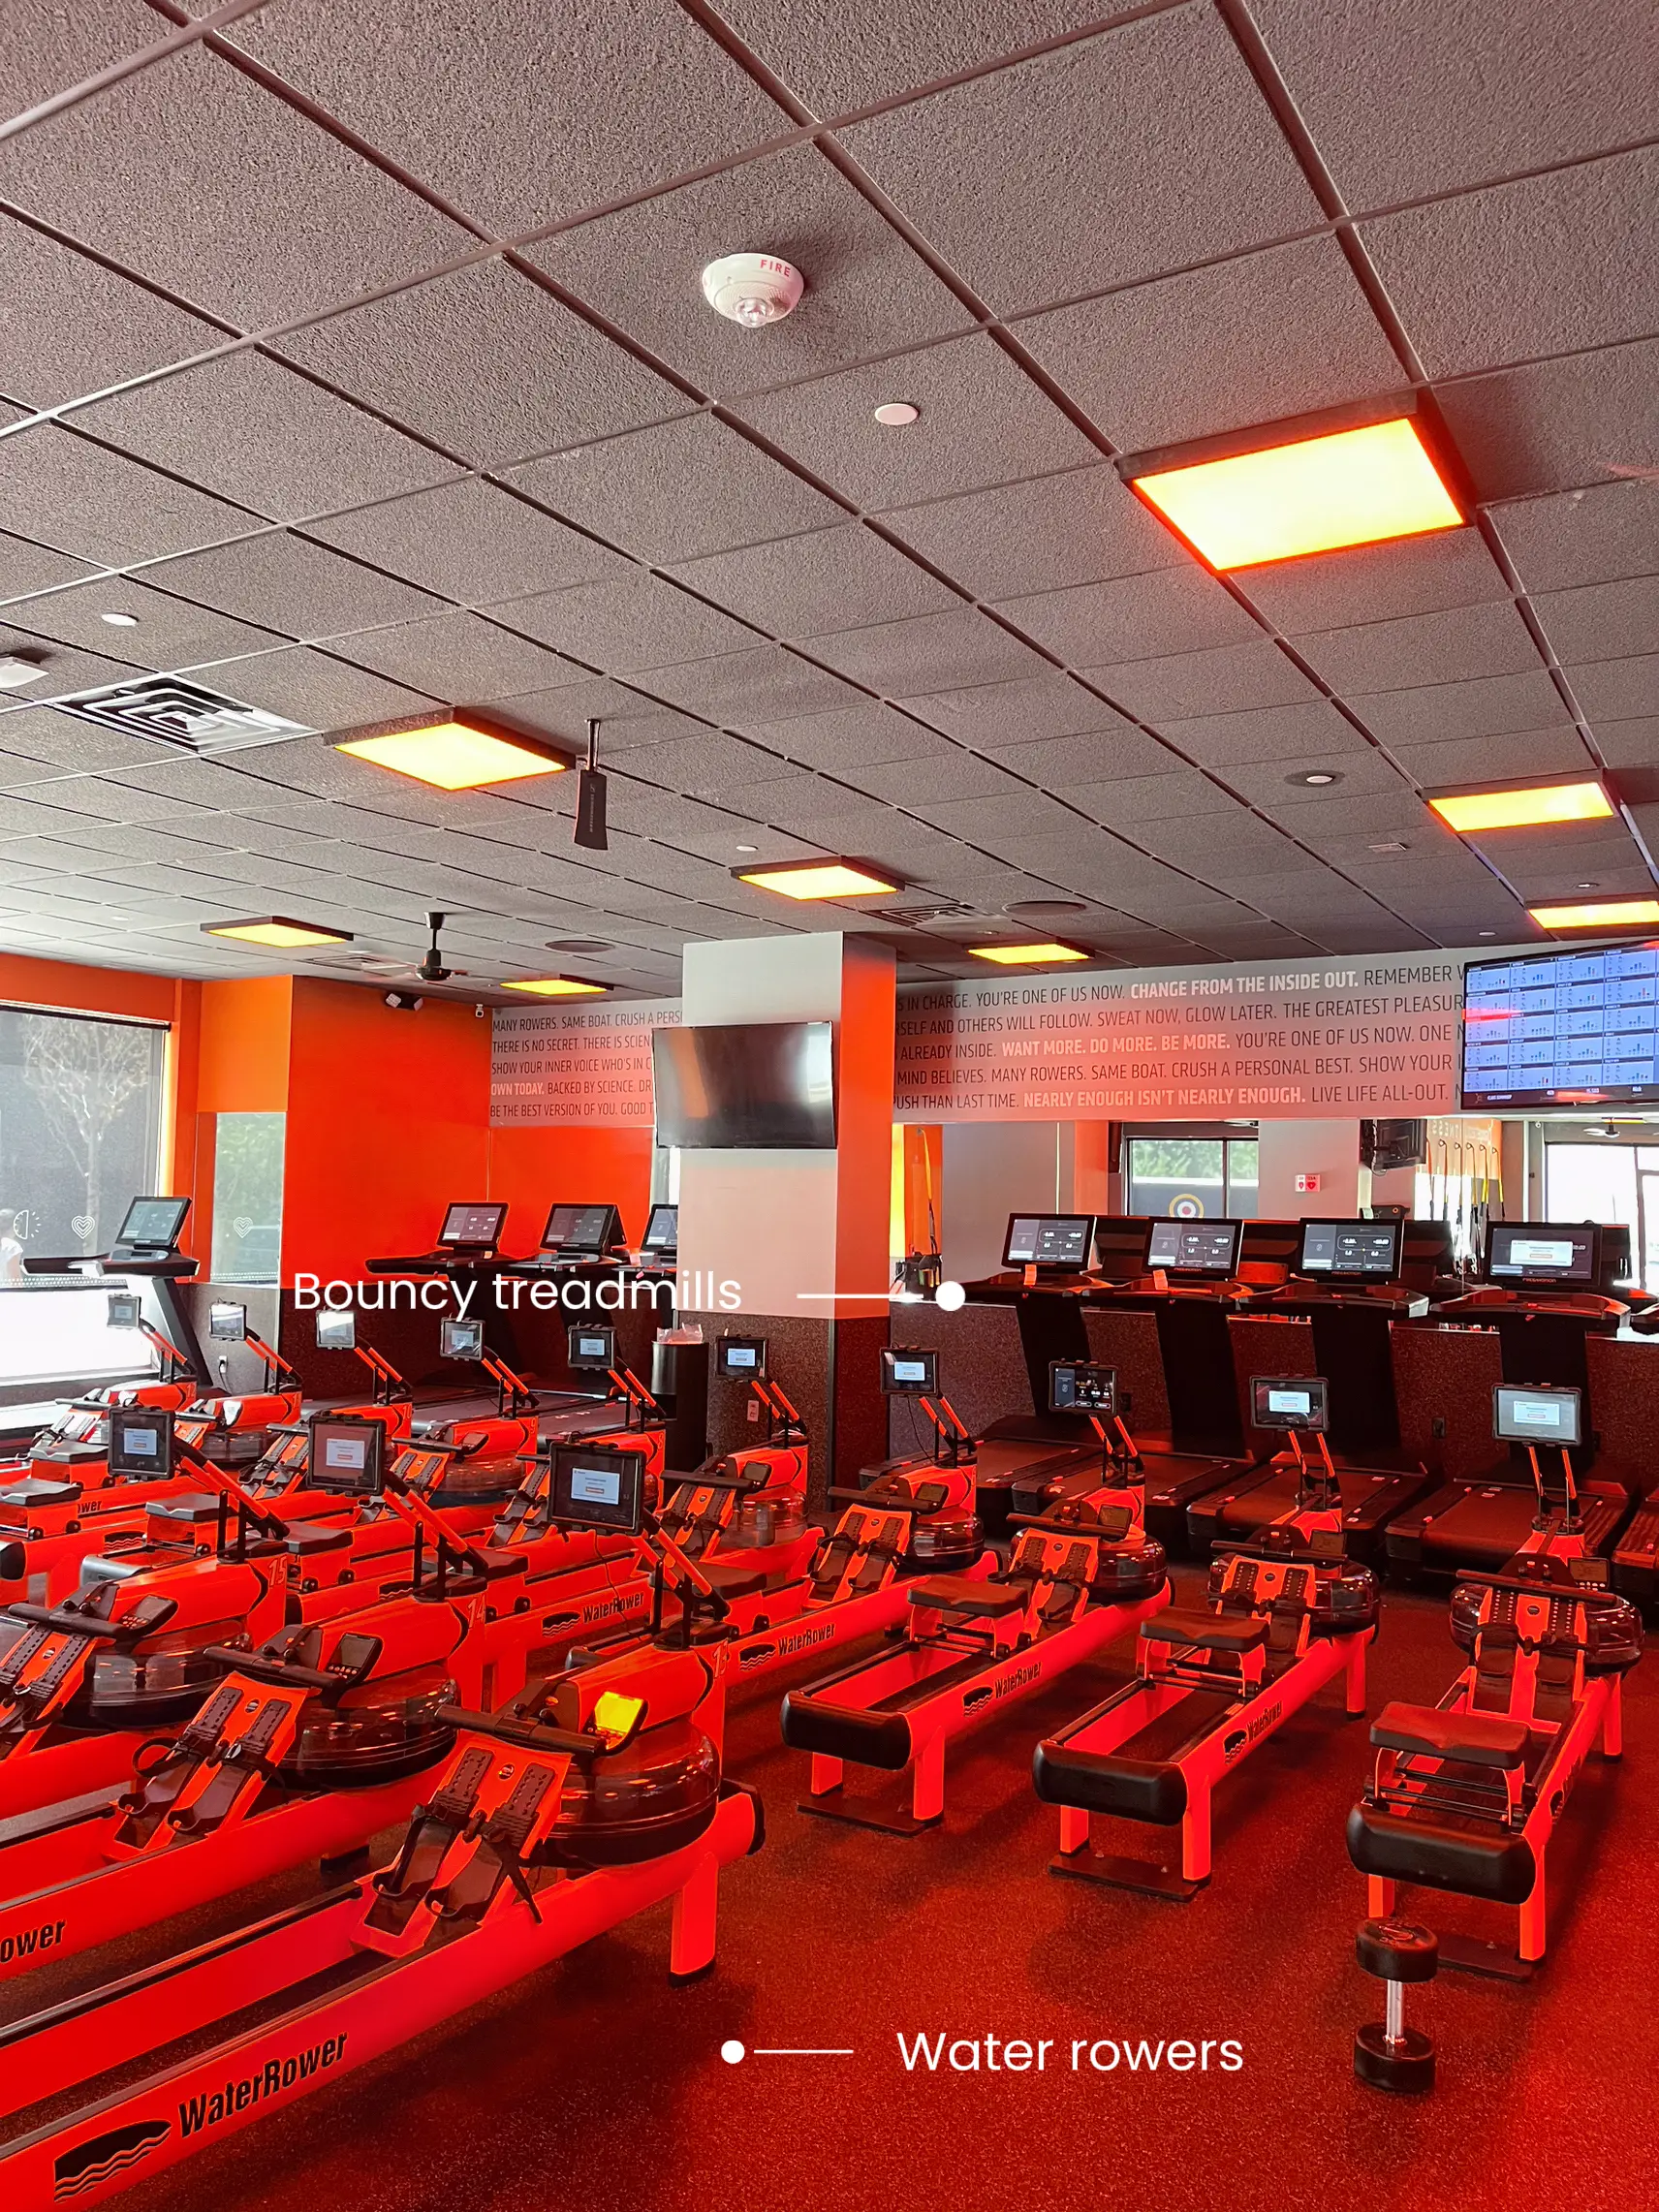  A gym with a lot of machines, including water rowers and bouncy treadmills.